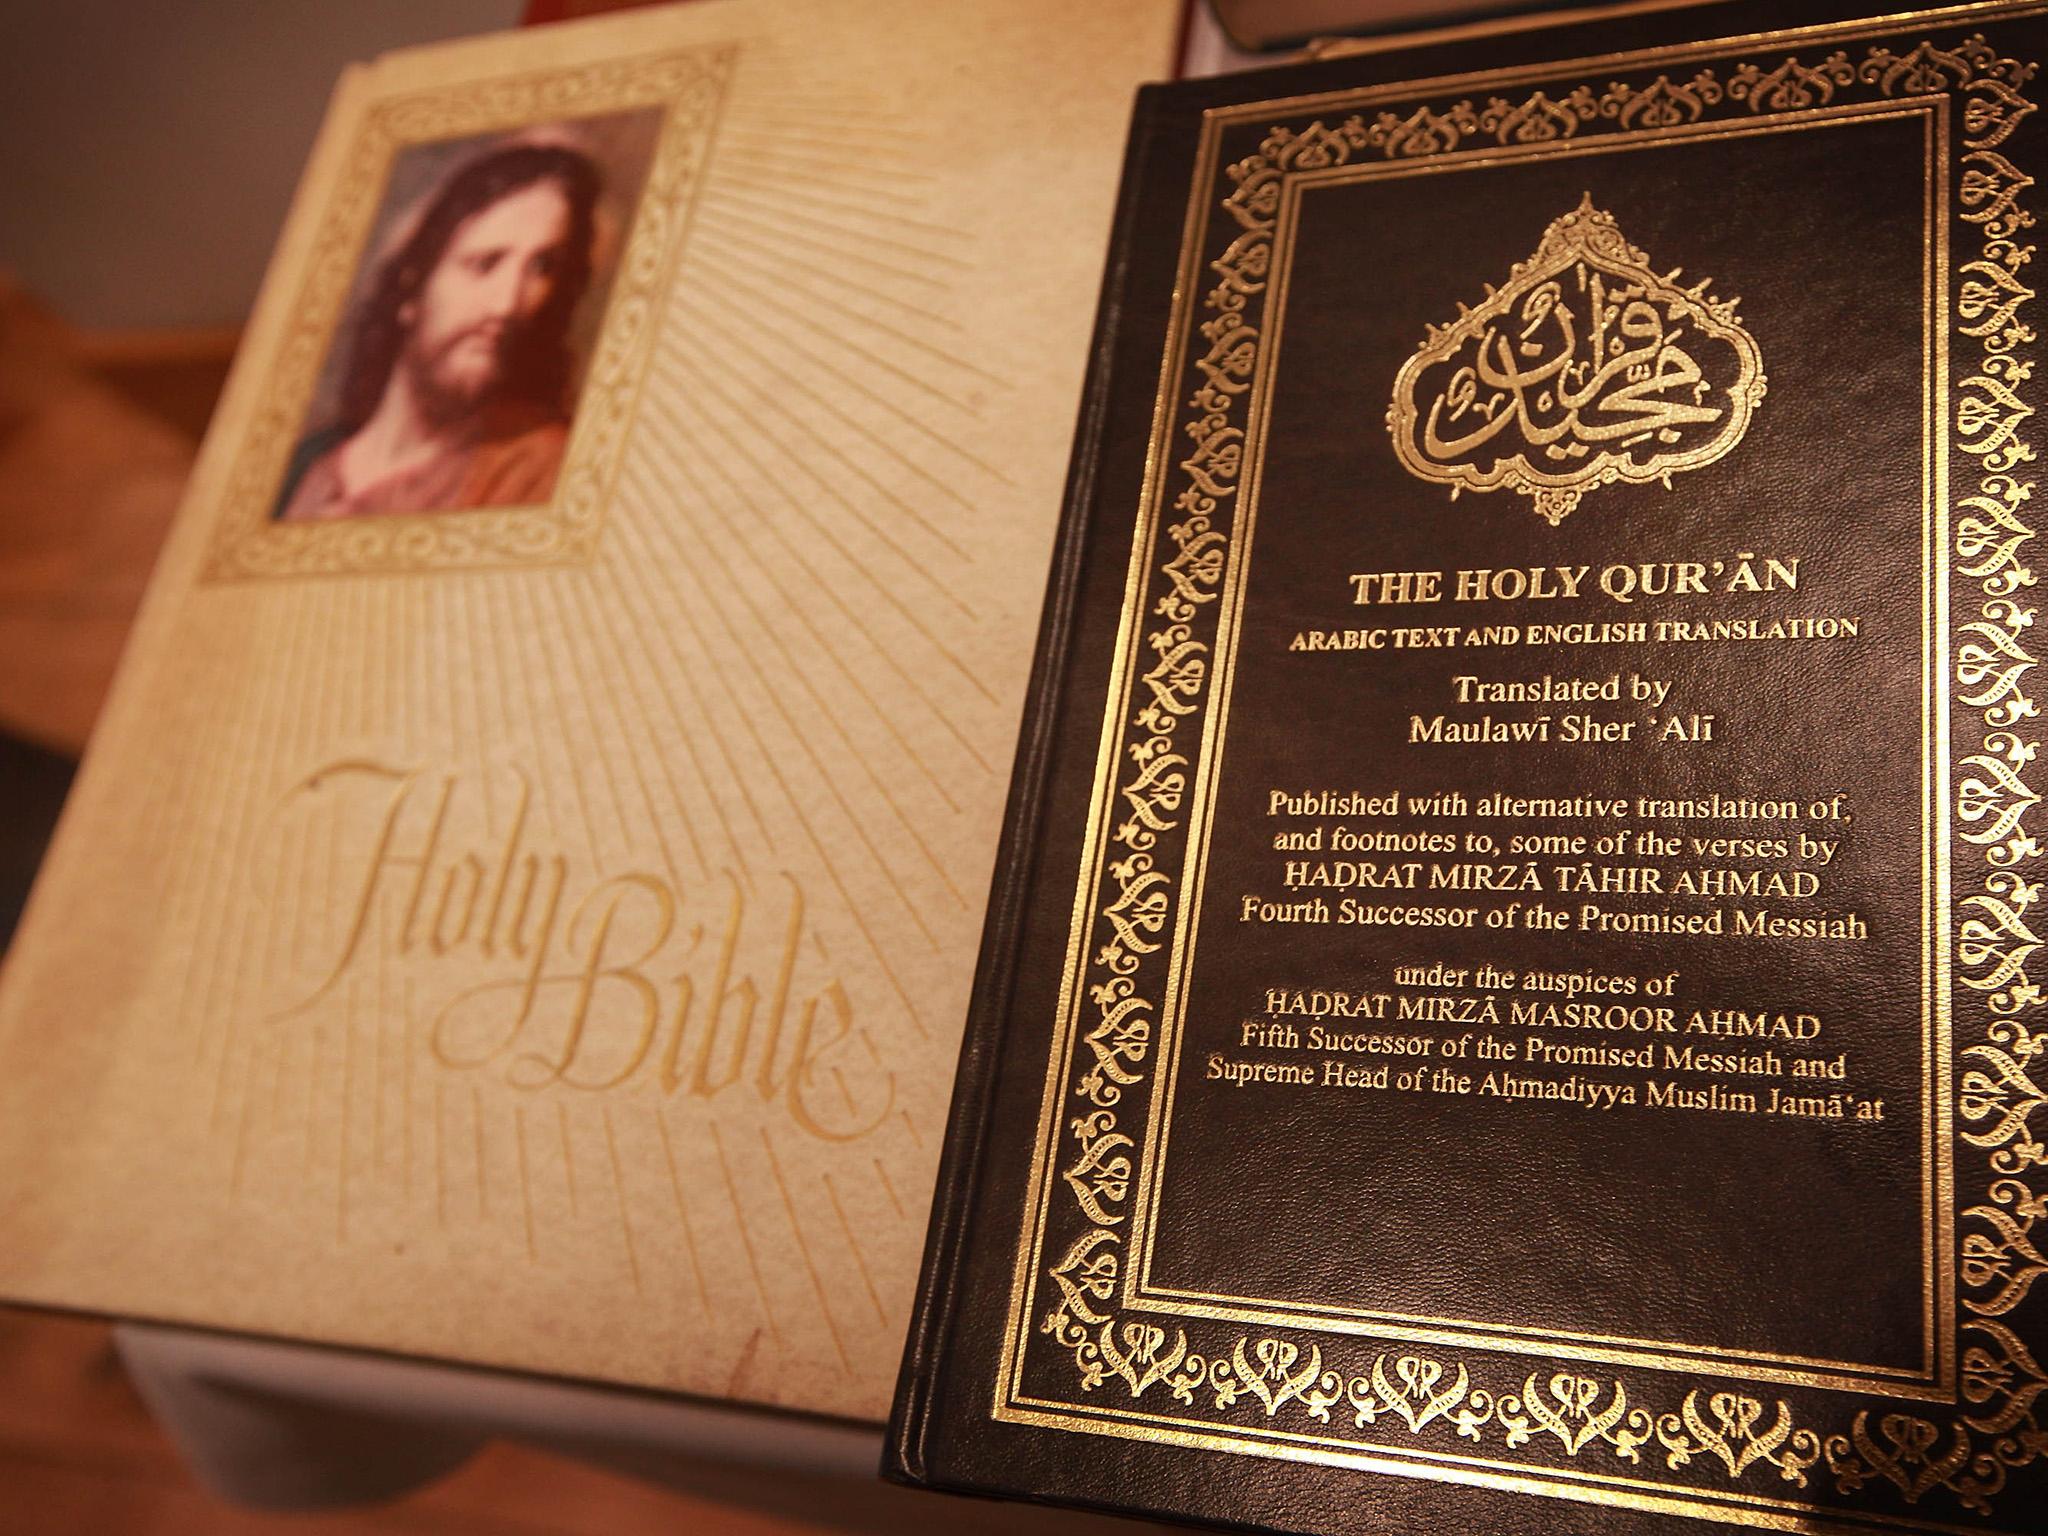 Ayaad teaches the Bible and the Koran to children side-by-side to encourage religious equality (file photo)